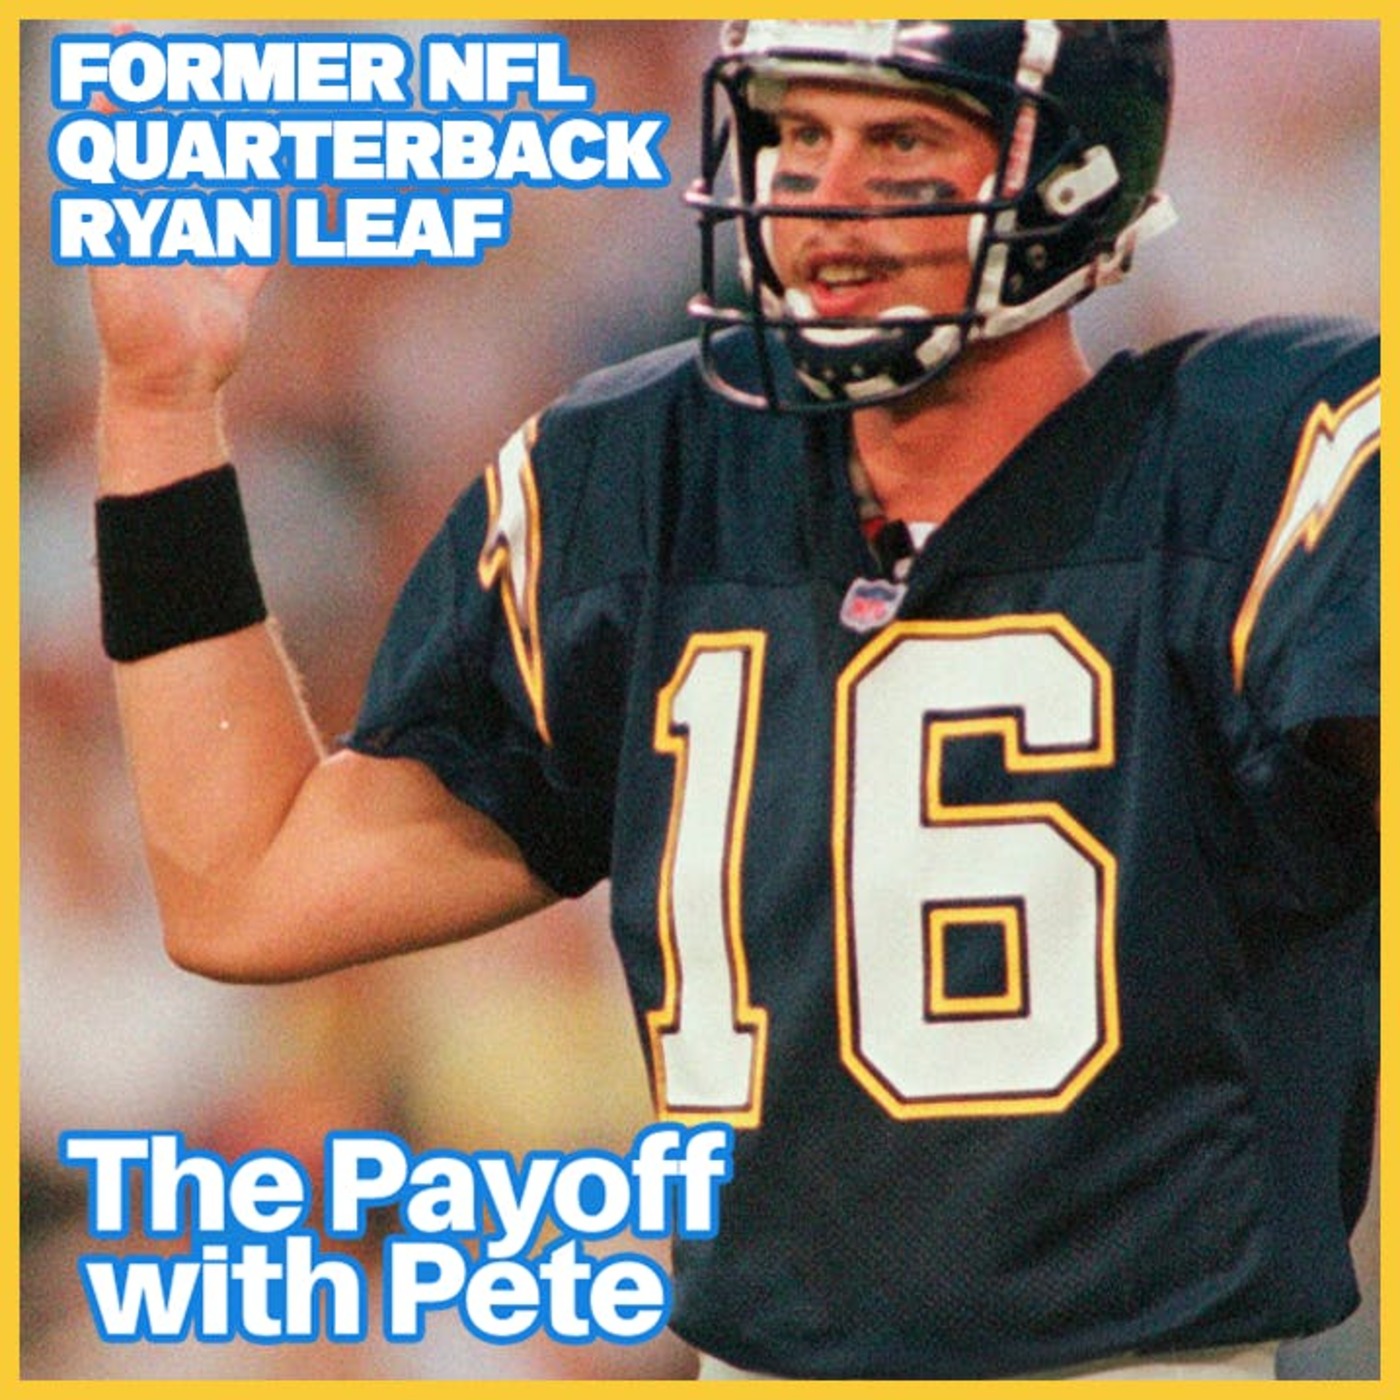 Former NFL Quarterback Ryan Leaf - The Payoff with Pete